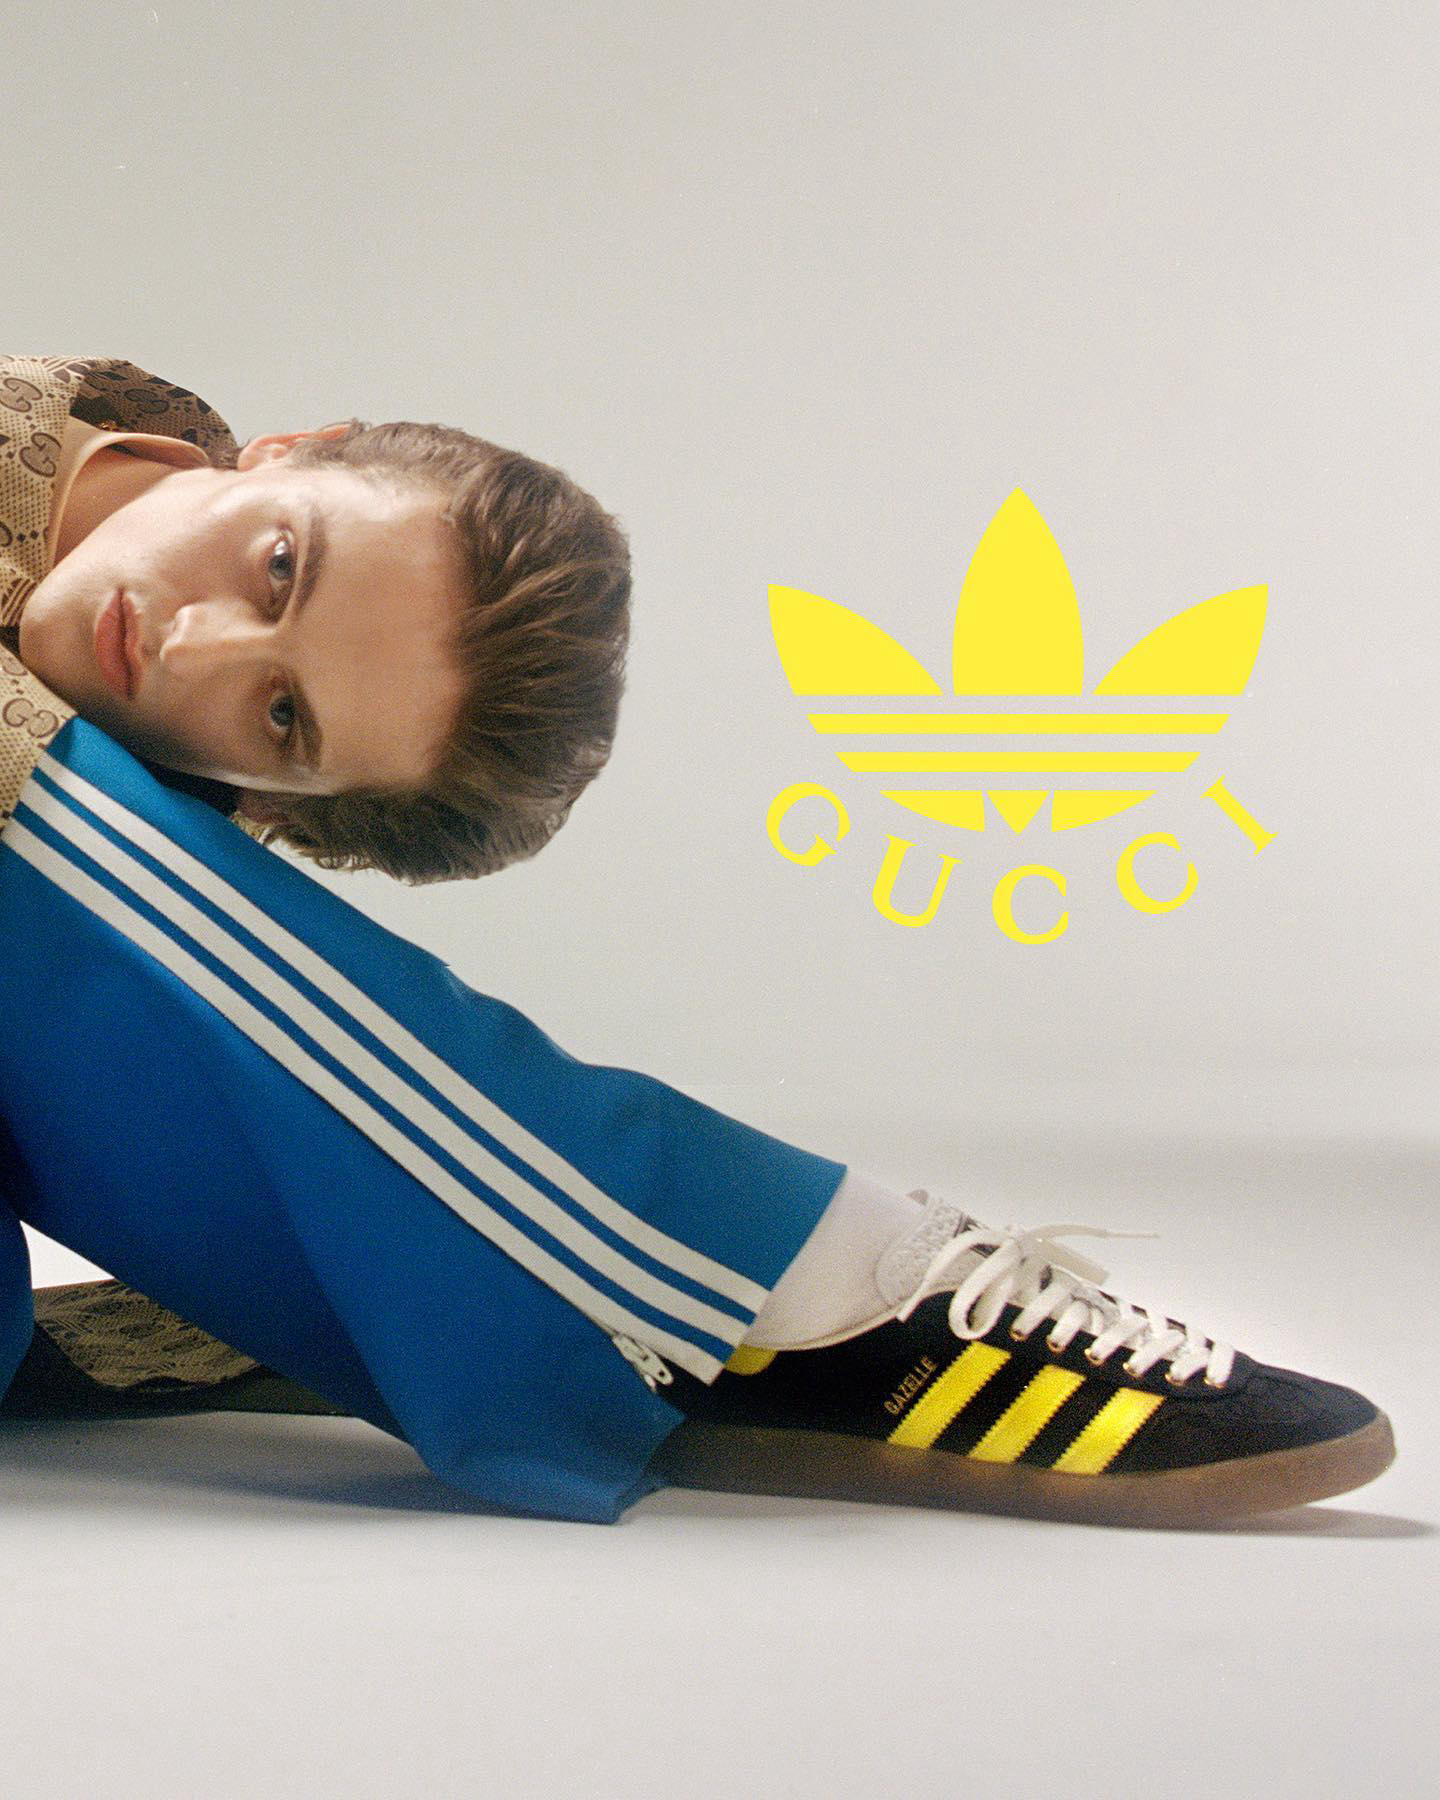 Bold and bright heritage codes come to the fore of the adidas x Gucci collection’s second chapter